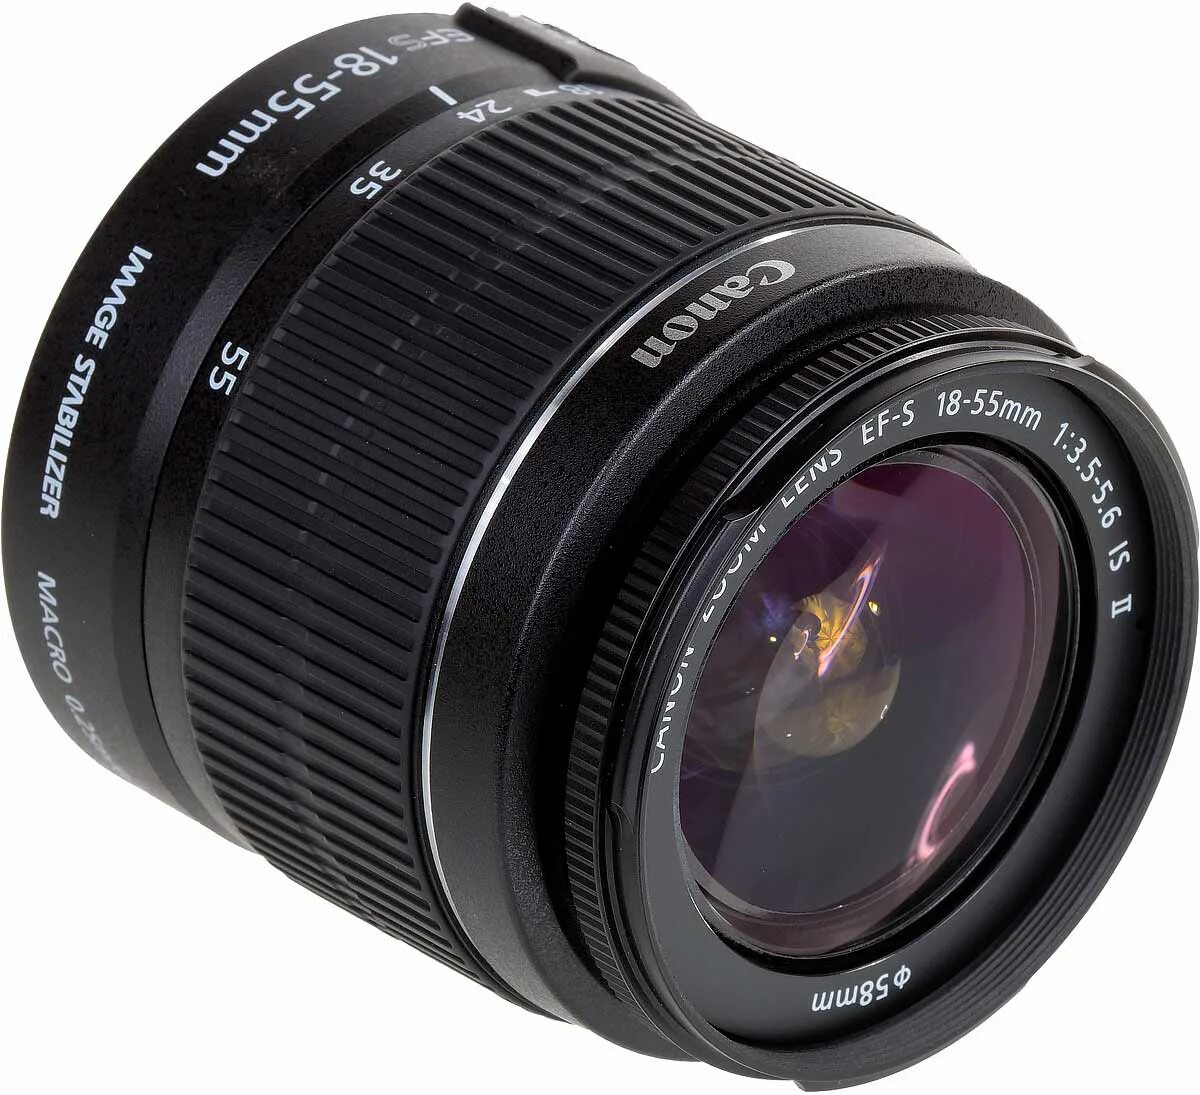 Canon EF-S 18-55mm. Canon 18-55mm f/3.5-5.6. Ef s 18 55mm f 3.5 5.6